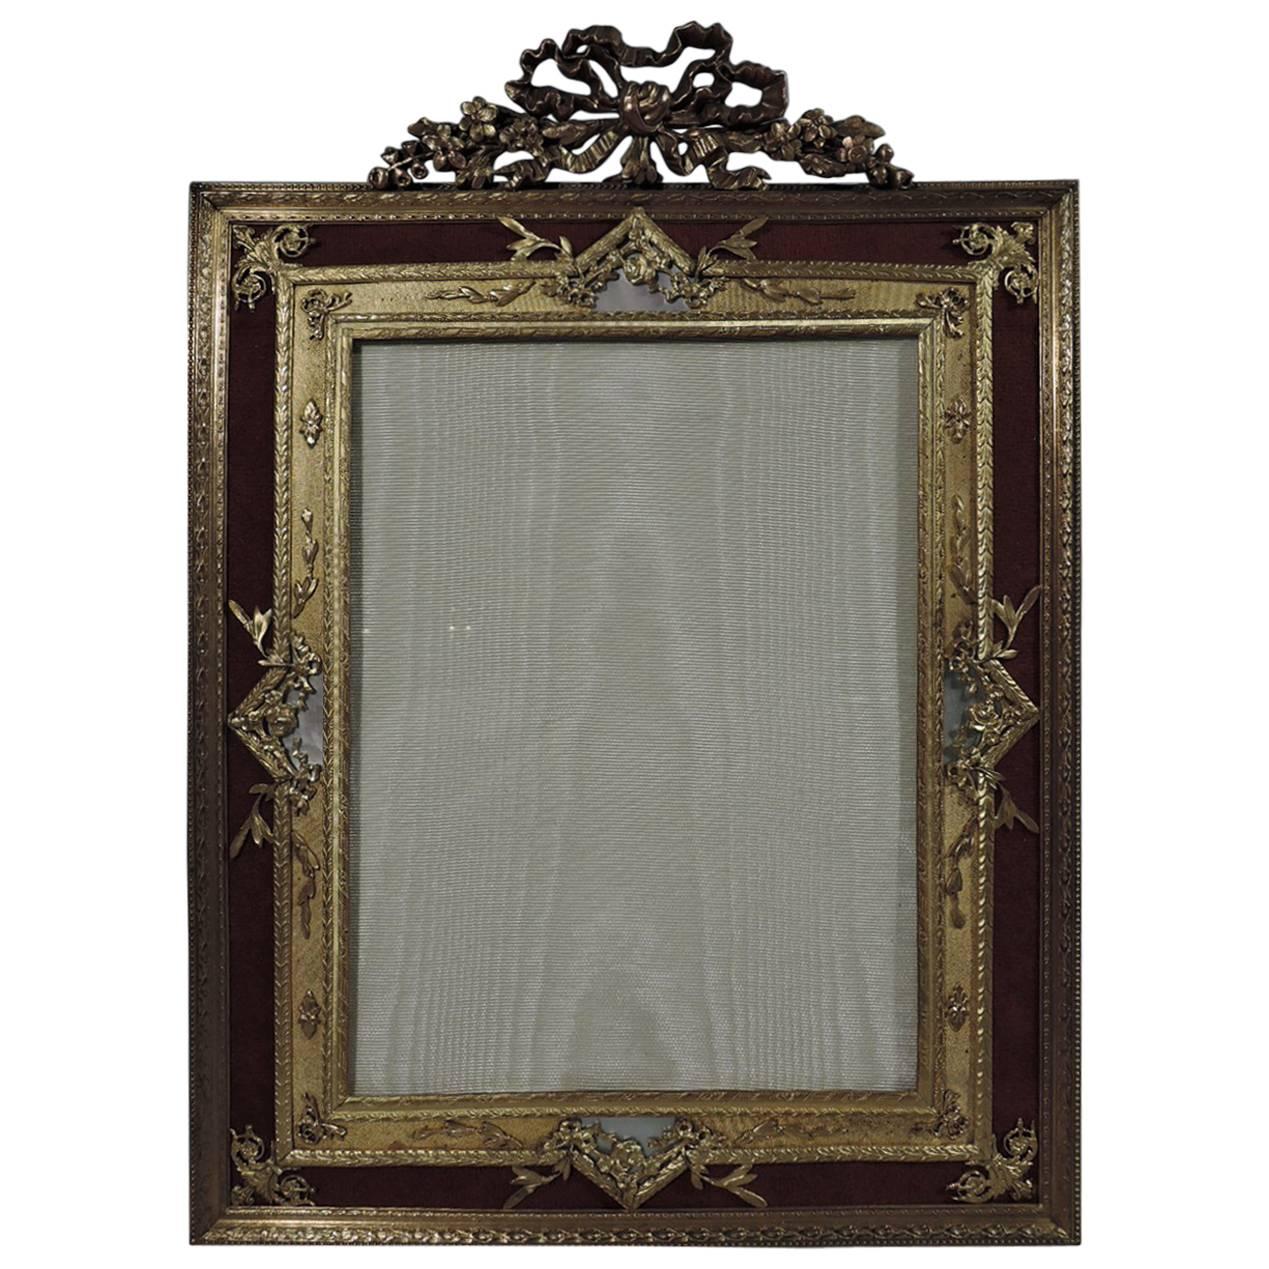 Large Antique Rococo Gilt Bronze and Mother-of-Pearl Picture Frame